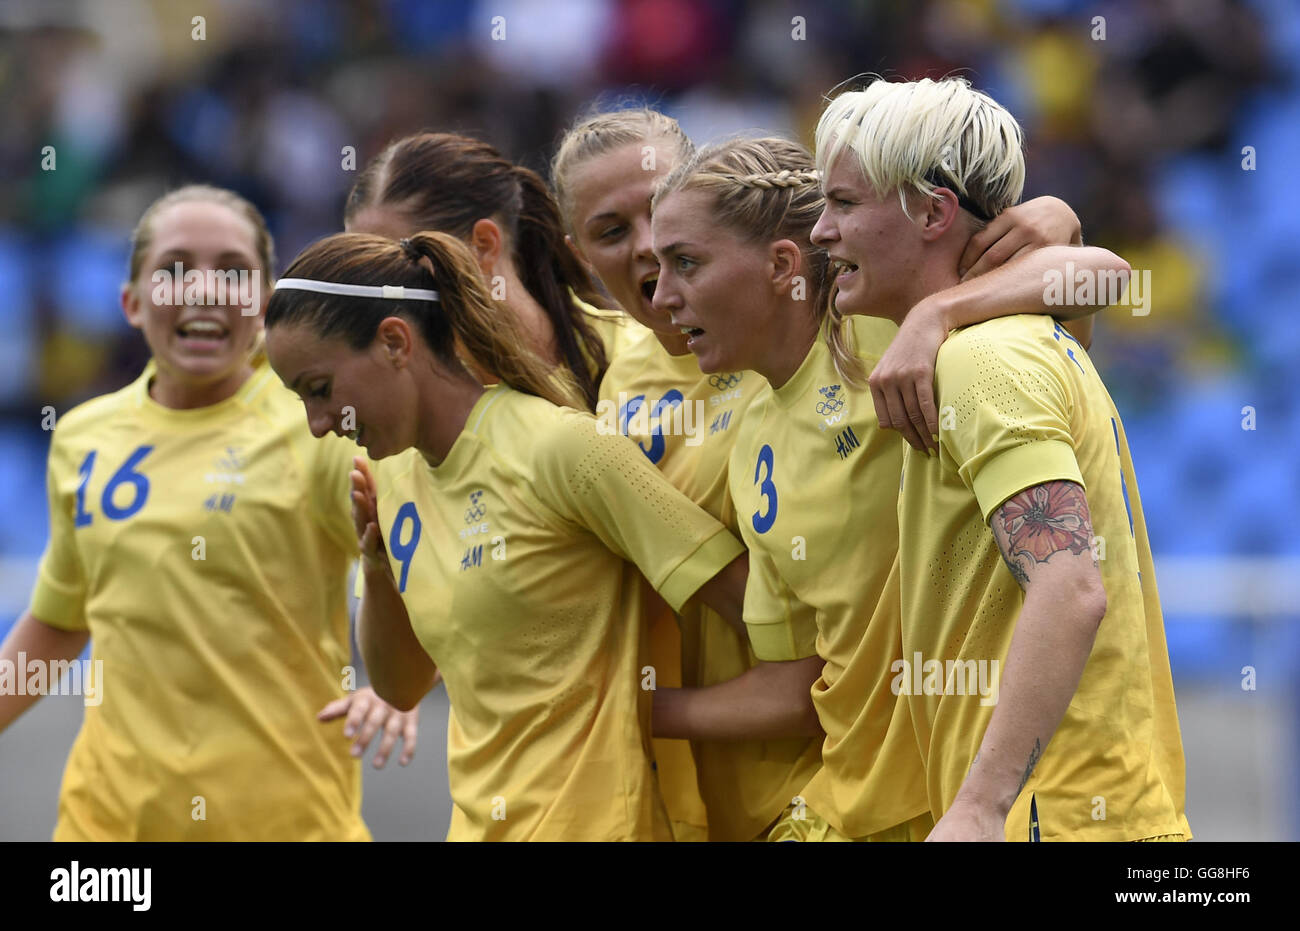 Rio De Janeiro, Brazil. 3rd Aug, 2016. Fischer Nilla of Sweden (1st R) celebrates scoring with her teammates during the opening match of the women's Olympic football competitions between South Africa and Sweden at the Olympic Stadium in Rio de Janeiro, Brazil, Aug. 3, 2016. Sweden won 1-0. © Qi Heng/Xinhua/Alamy Live News Stock Photo